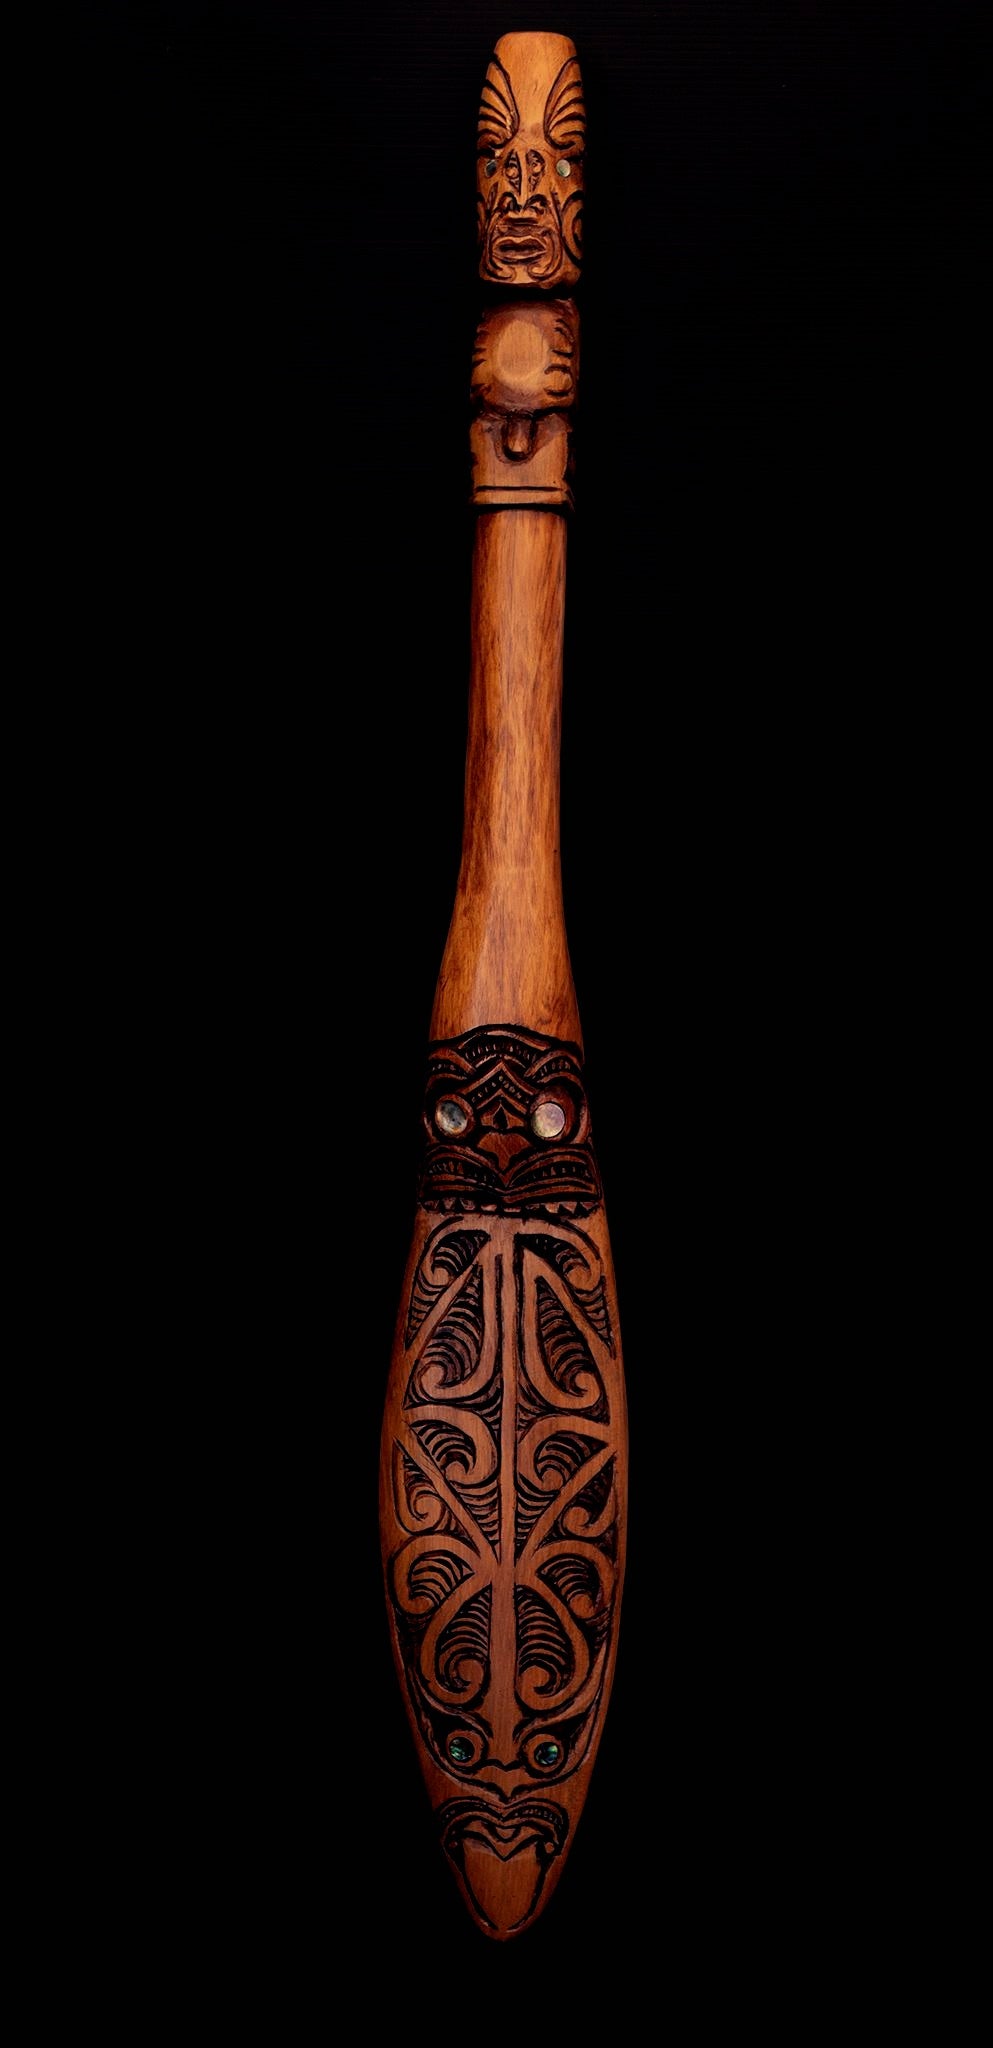 Hand Carved Waka Hoe Paddle Oar by Grant Holder Silver Fern Gallery